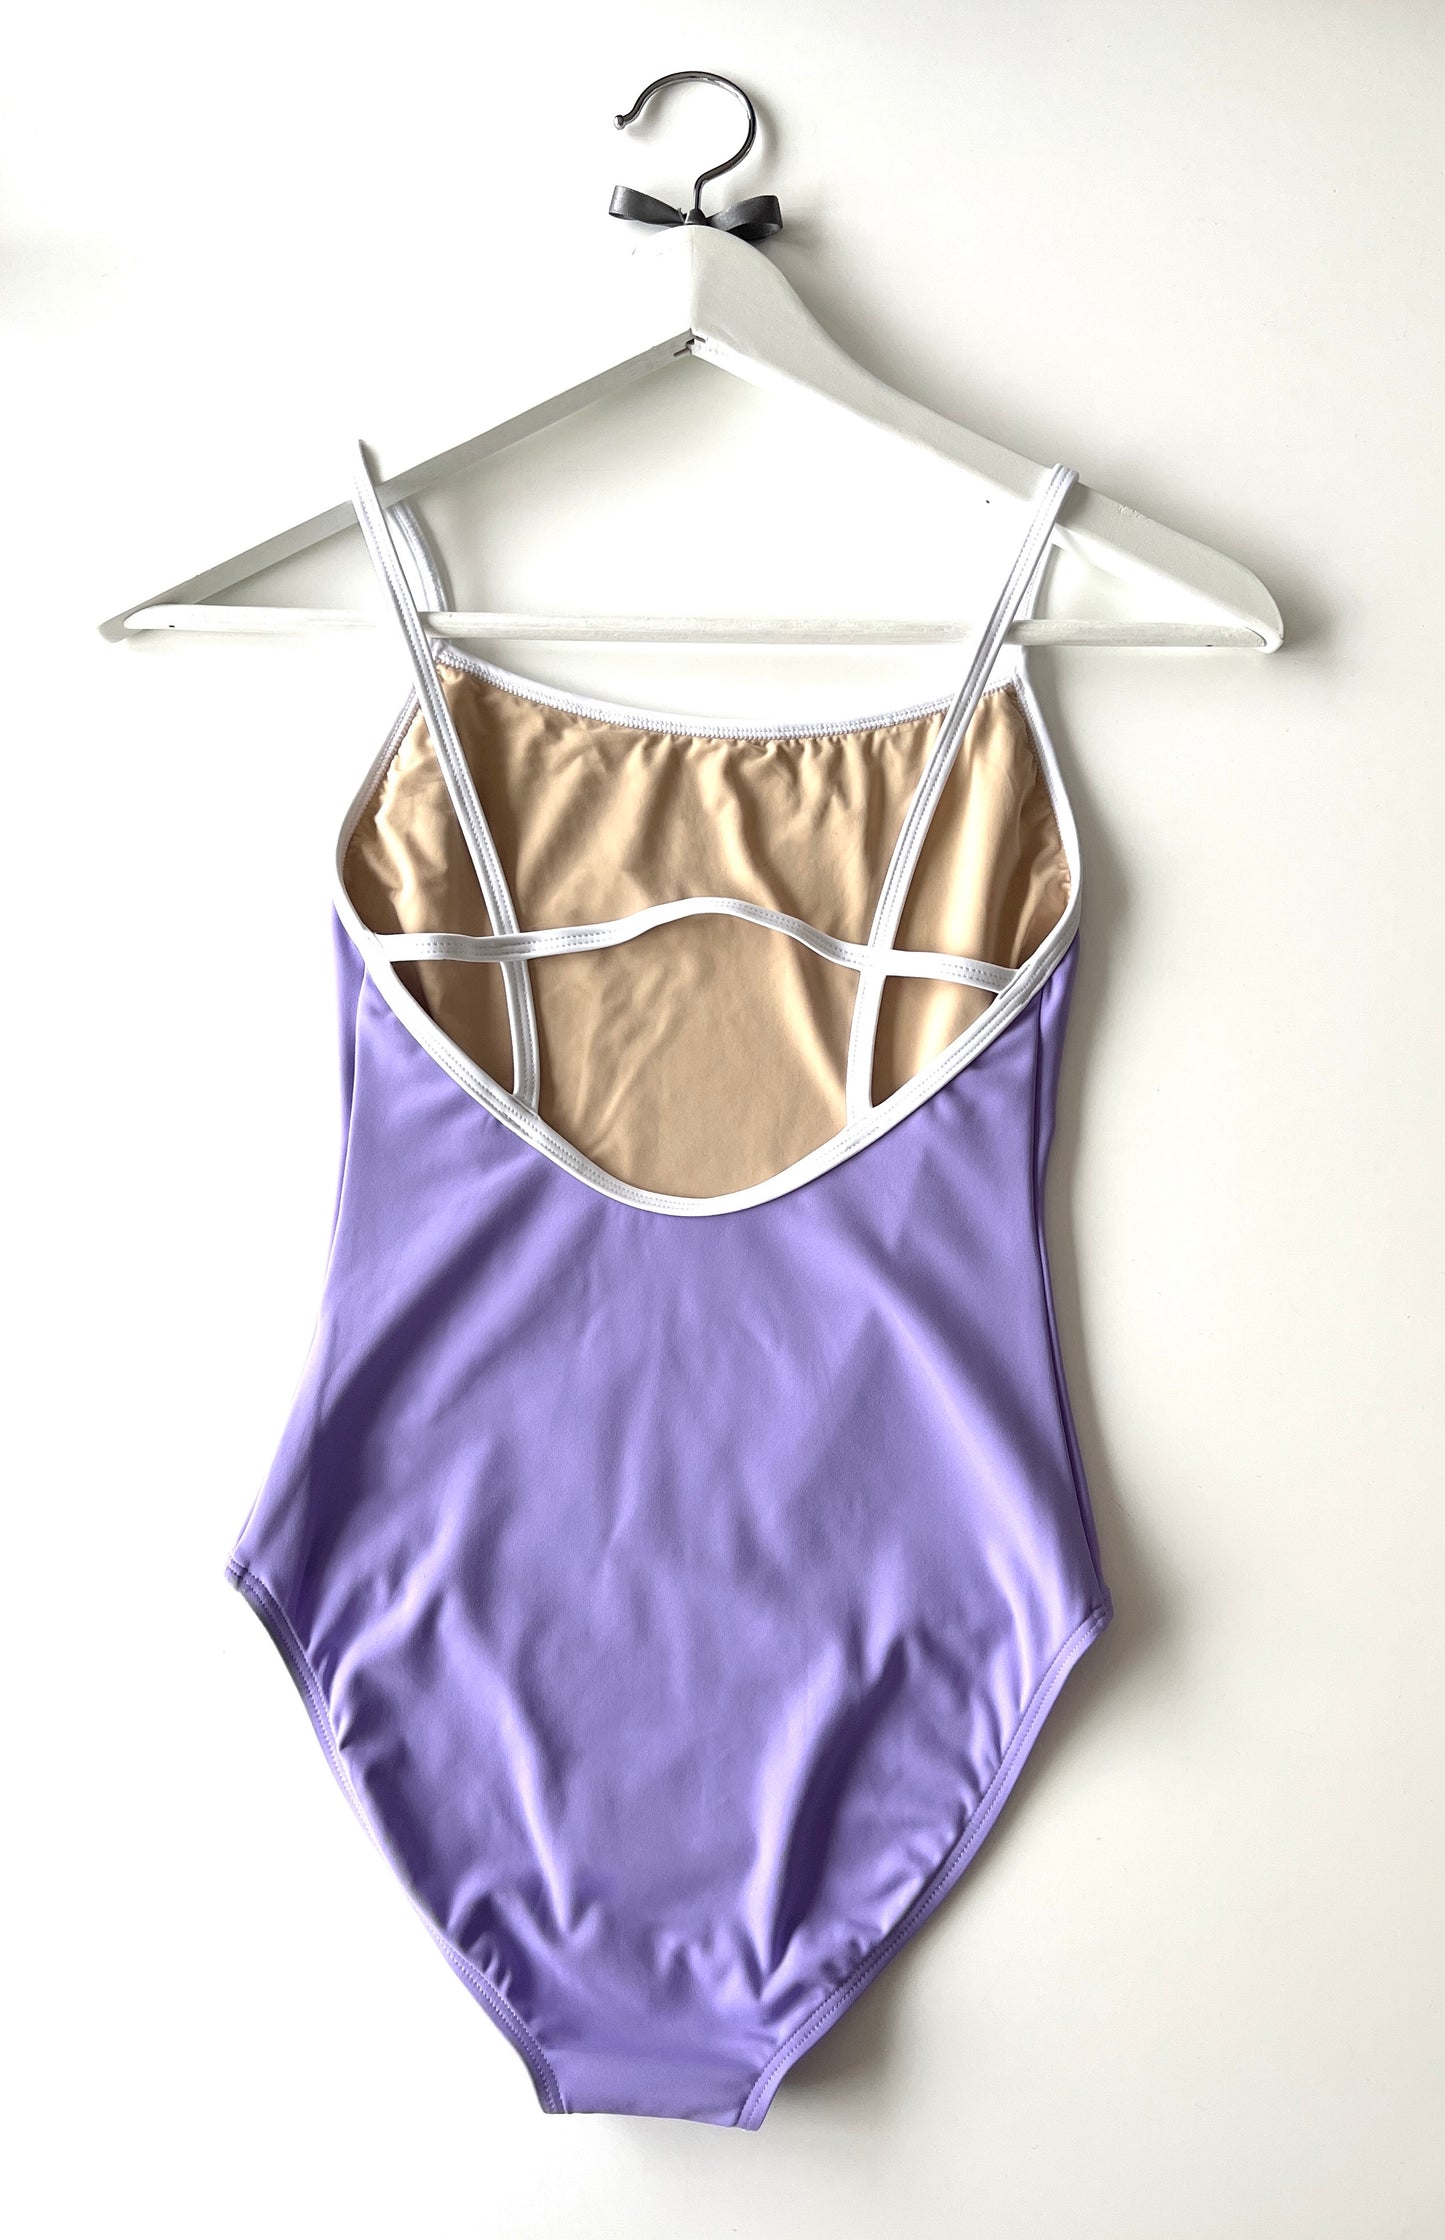 The Lilac One lilac ballet dance leotard in camisole style from The Collective Dancewear